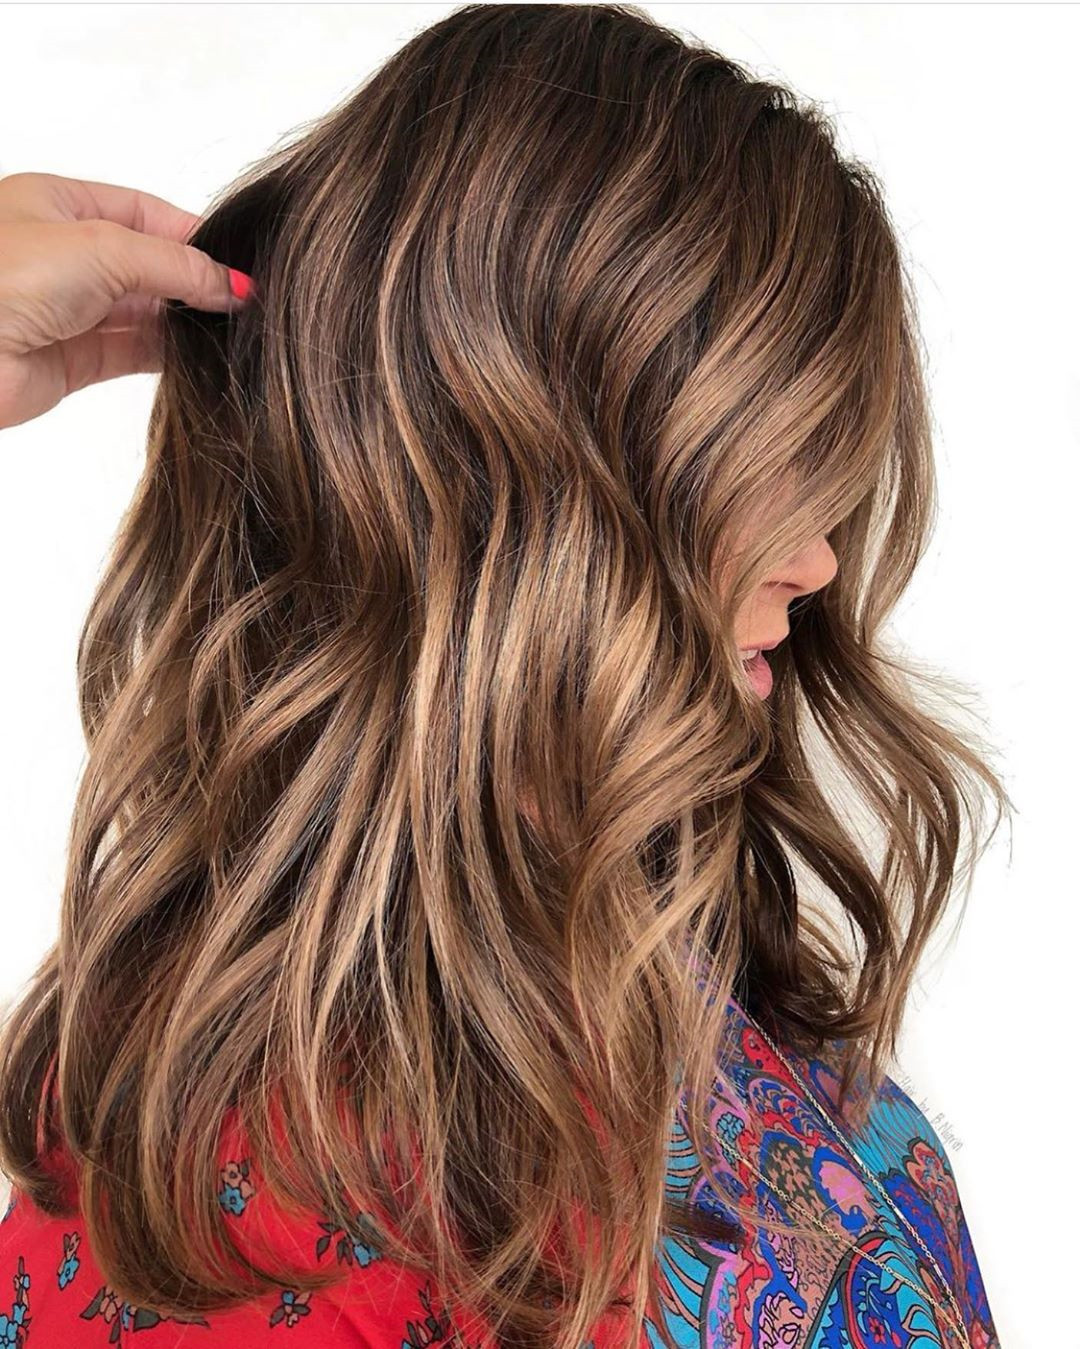 60 Trendy Long Hairstyles for Women to Try This Summer